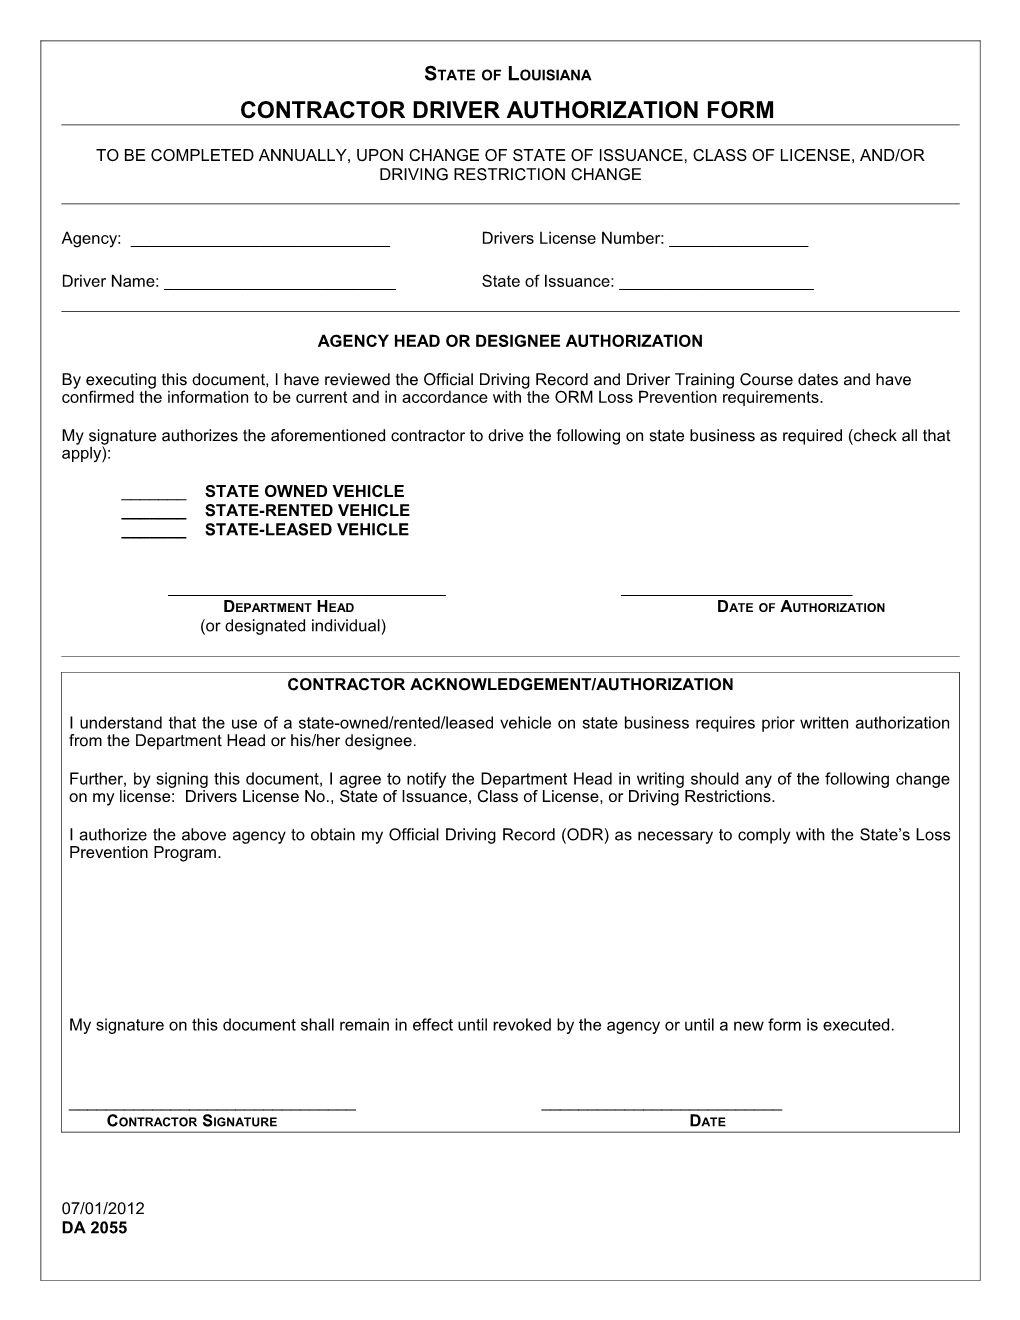 Authorization and Driving History Form s1